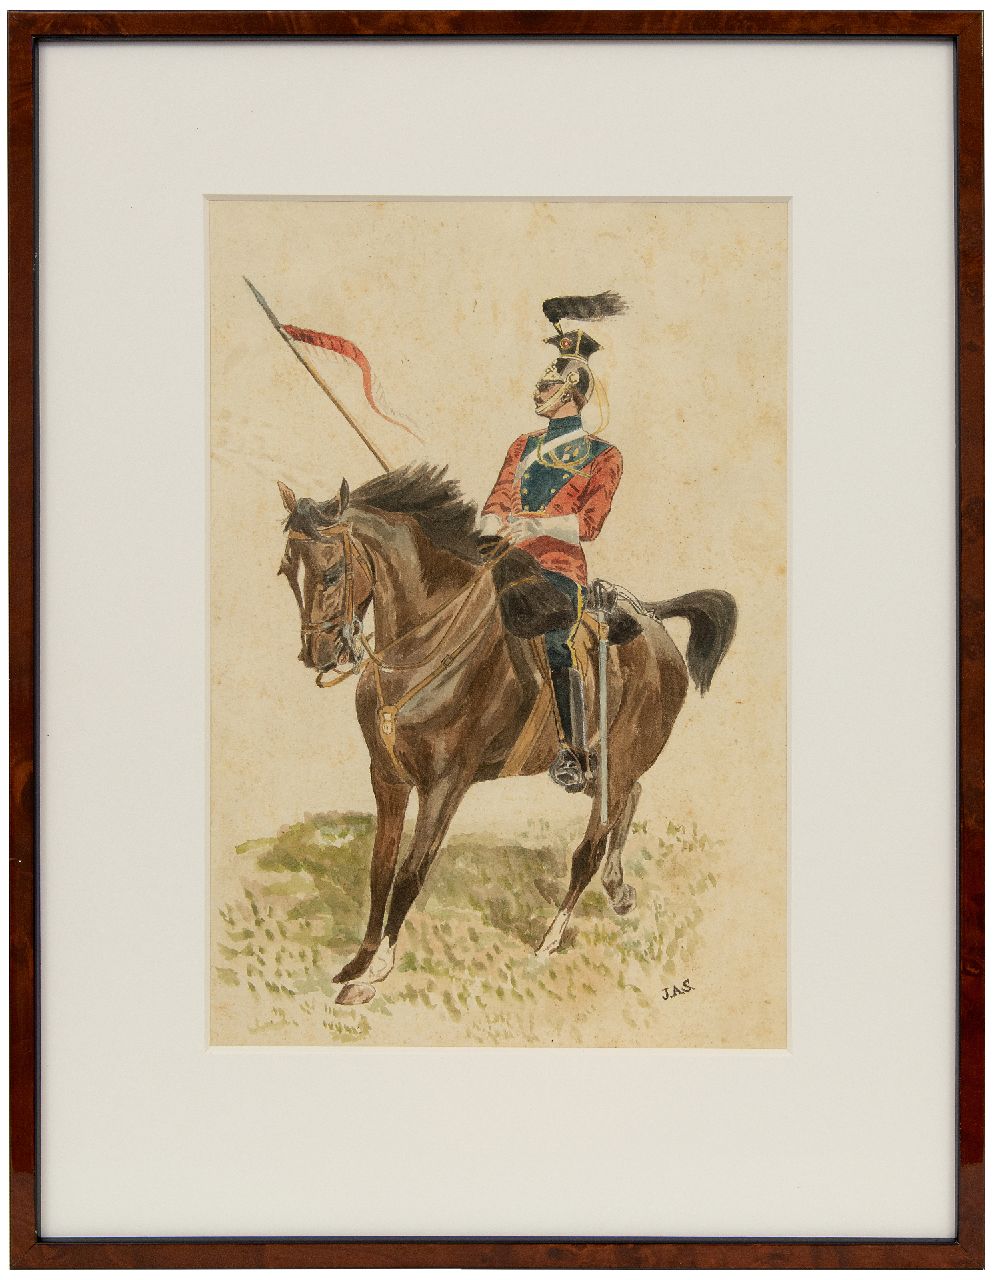 Staring W.C.  | Willem Constantijn Staring | Watercolours and drawings offered for sale | A cavalry man on horseback, watercolour on paper 30.9 x 21.0 cm